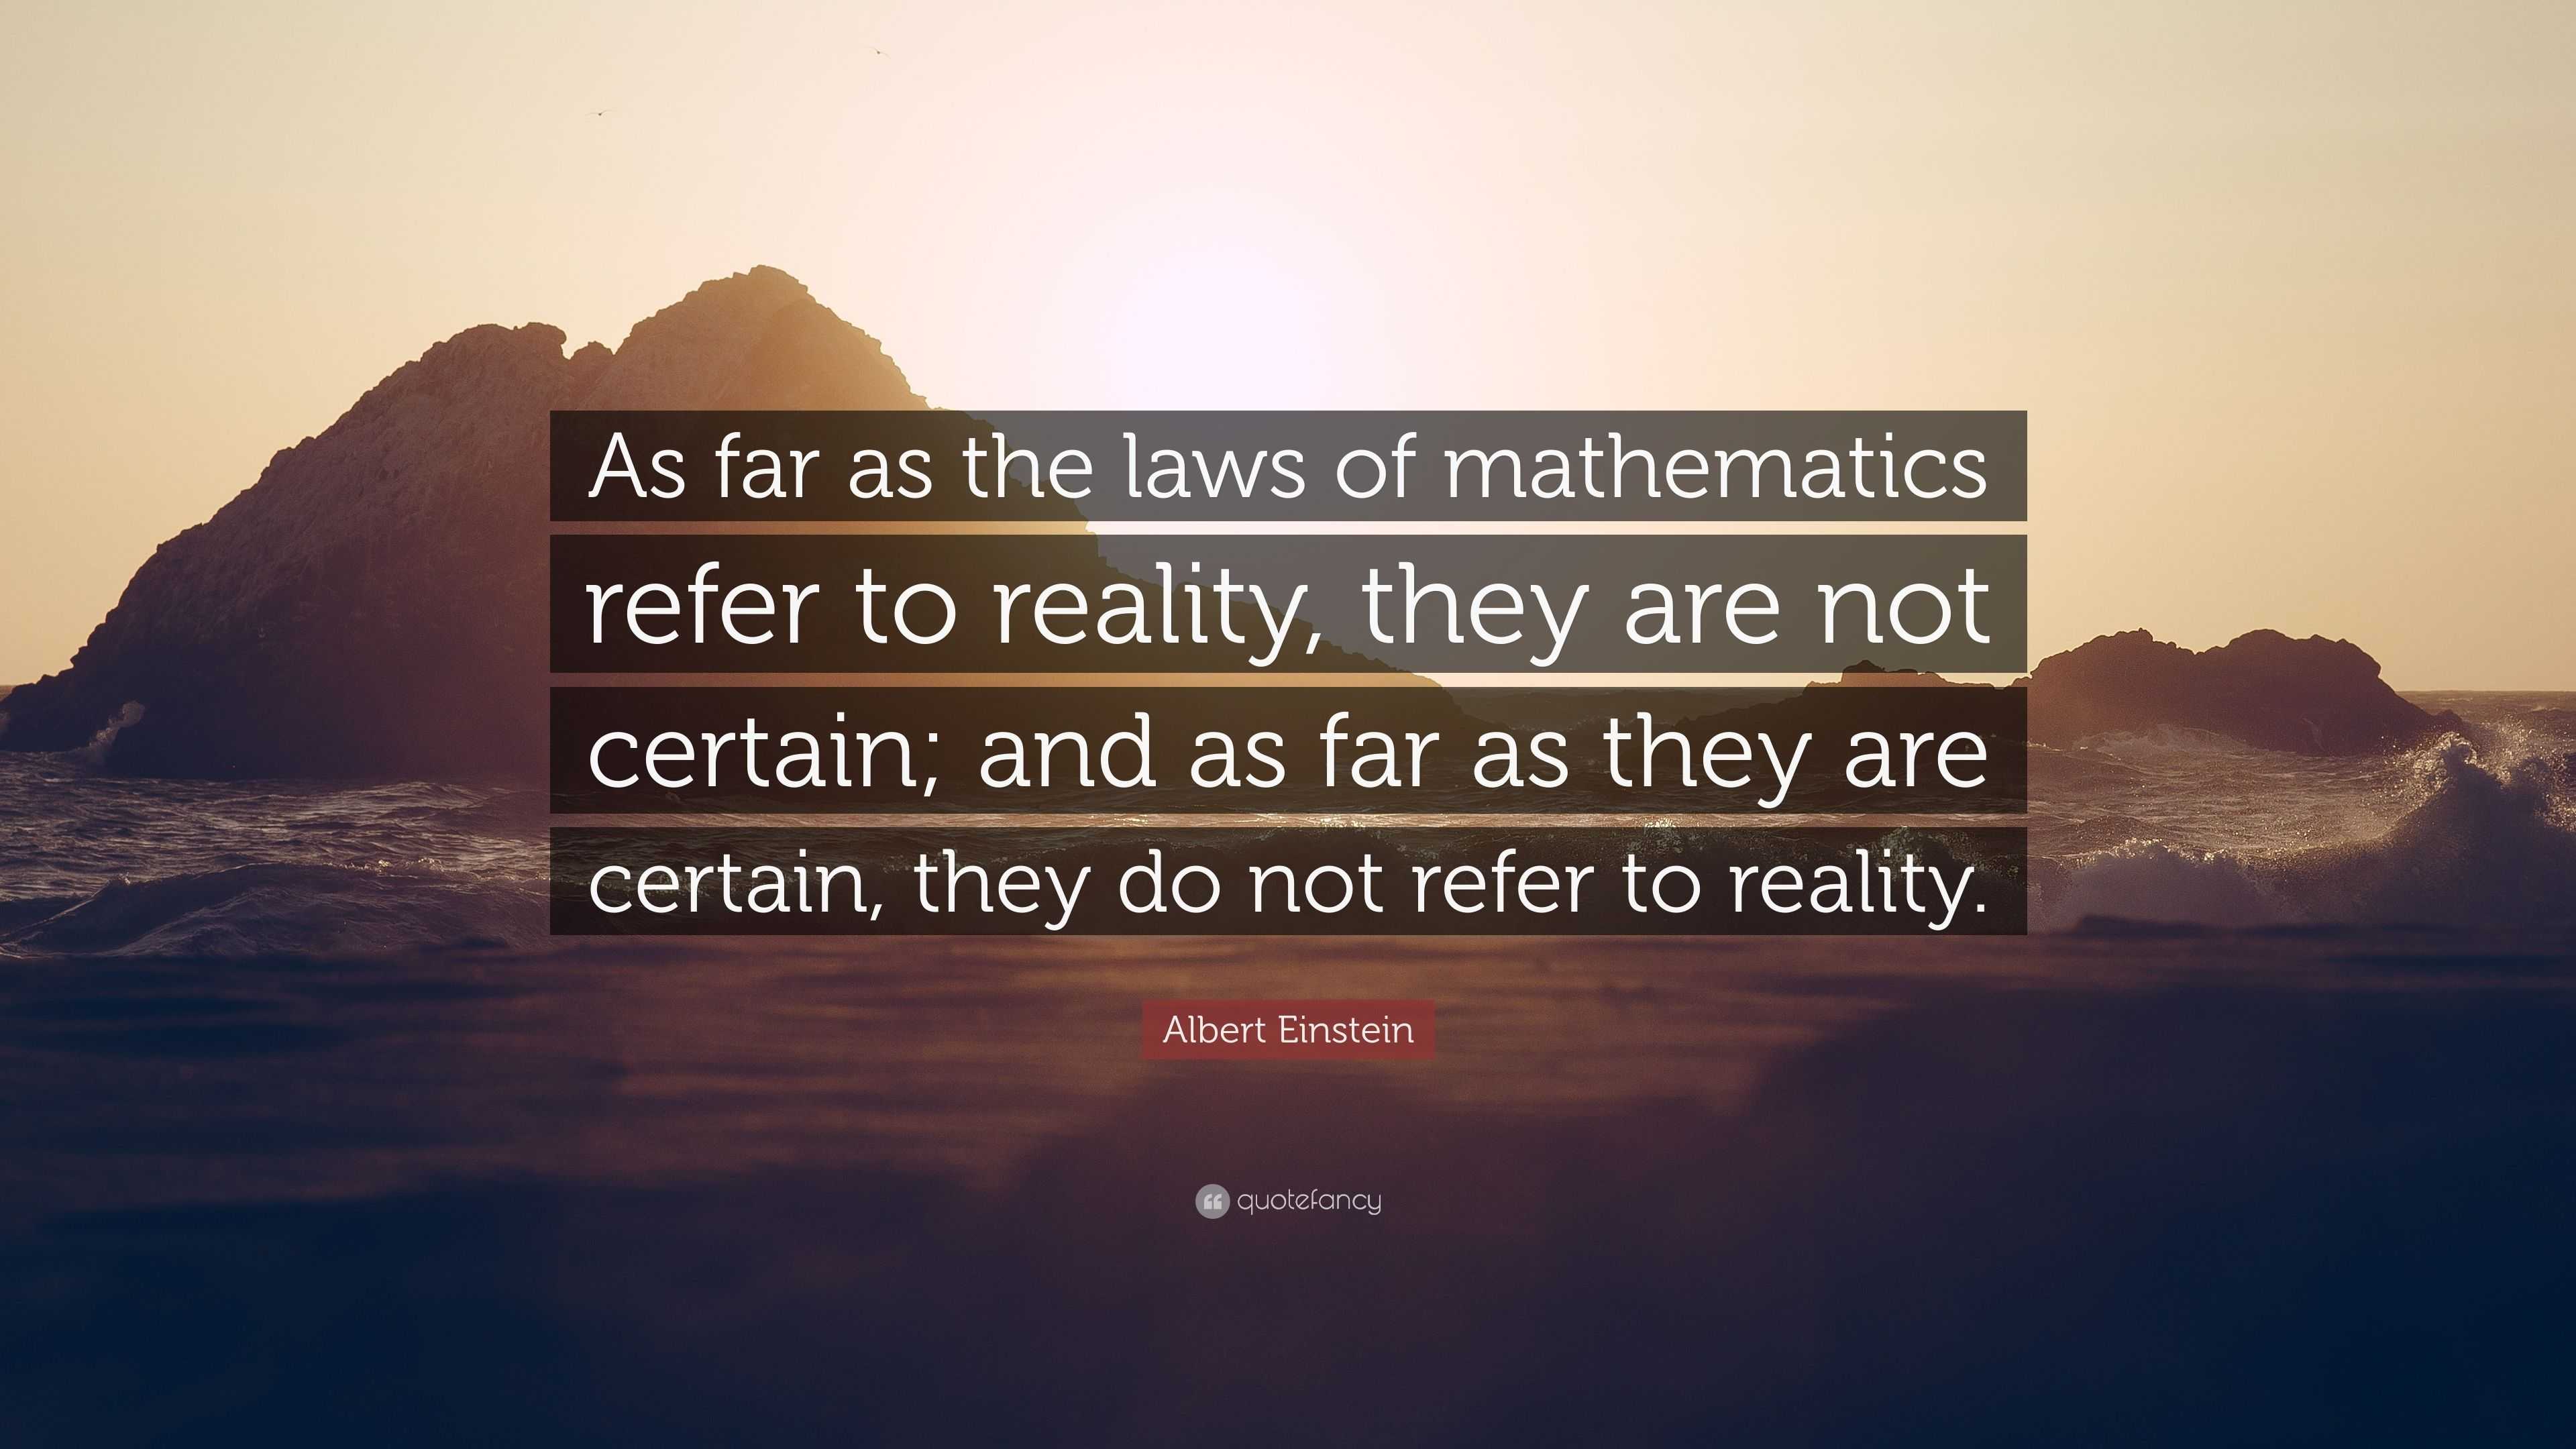 Albert Einstein Quote: “As far as the laws of mathematics refer to